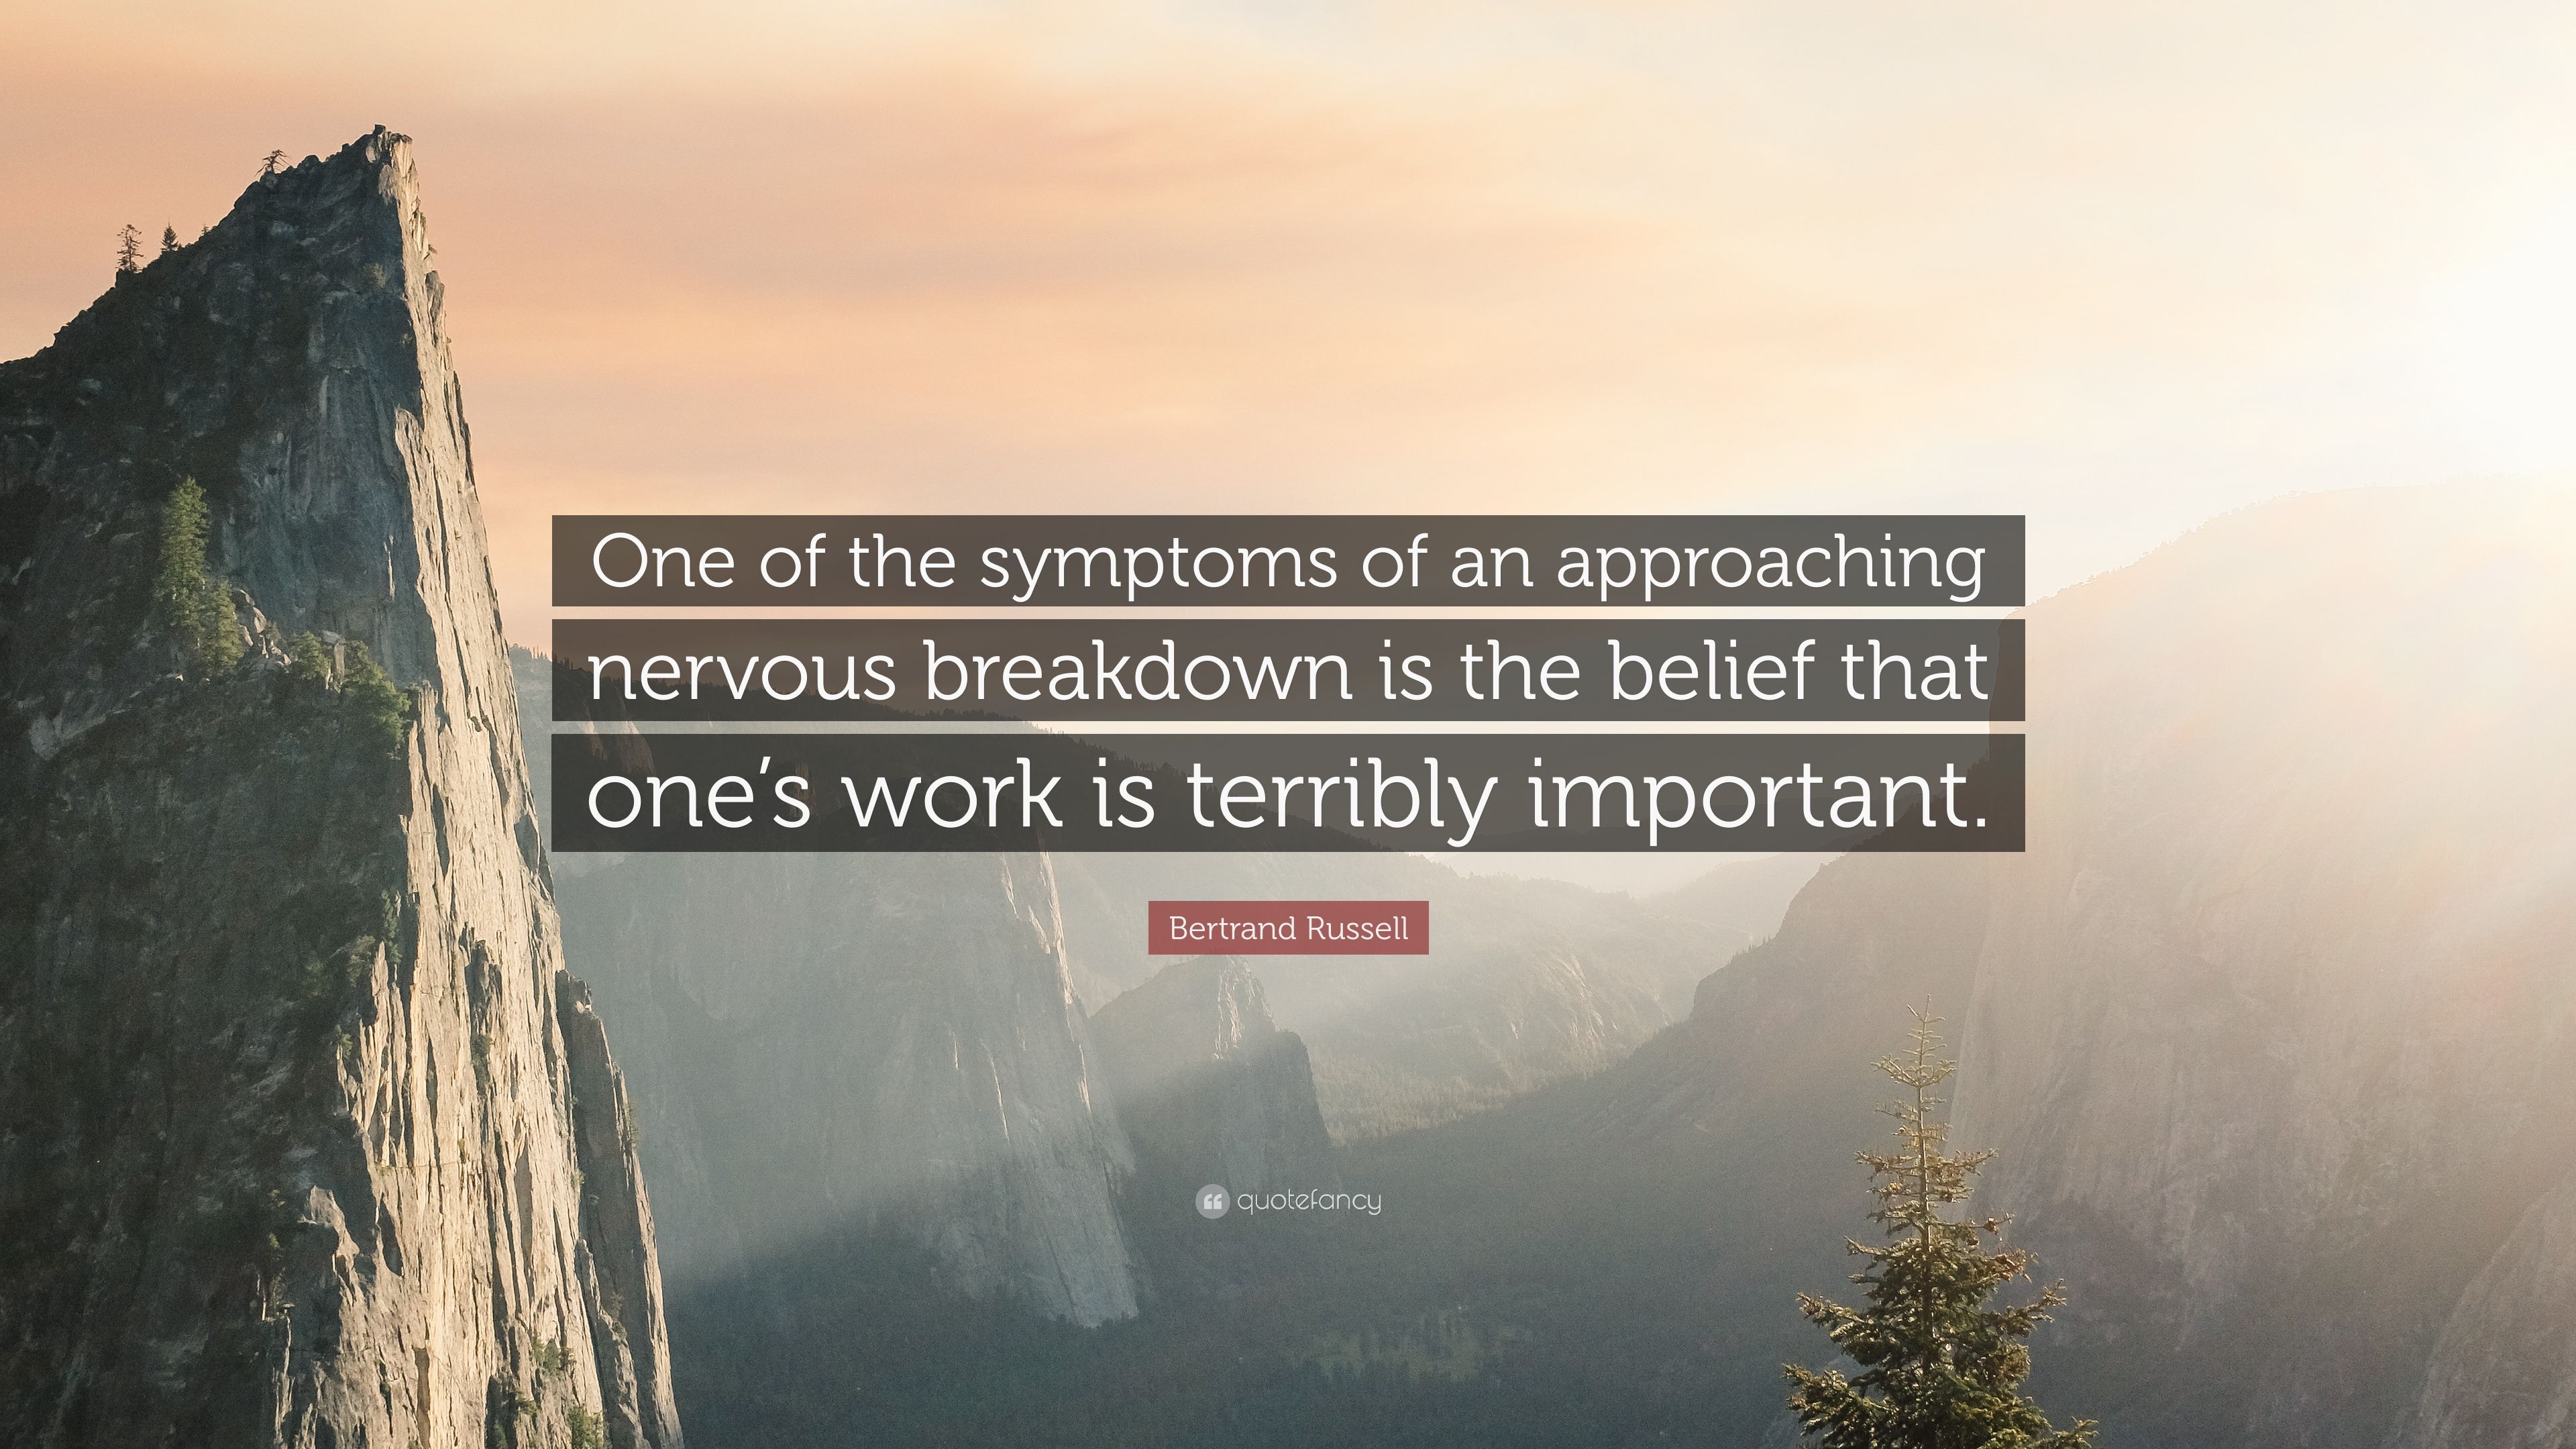 Bertrand Russell Quote: “One of the symptoms of an approaching